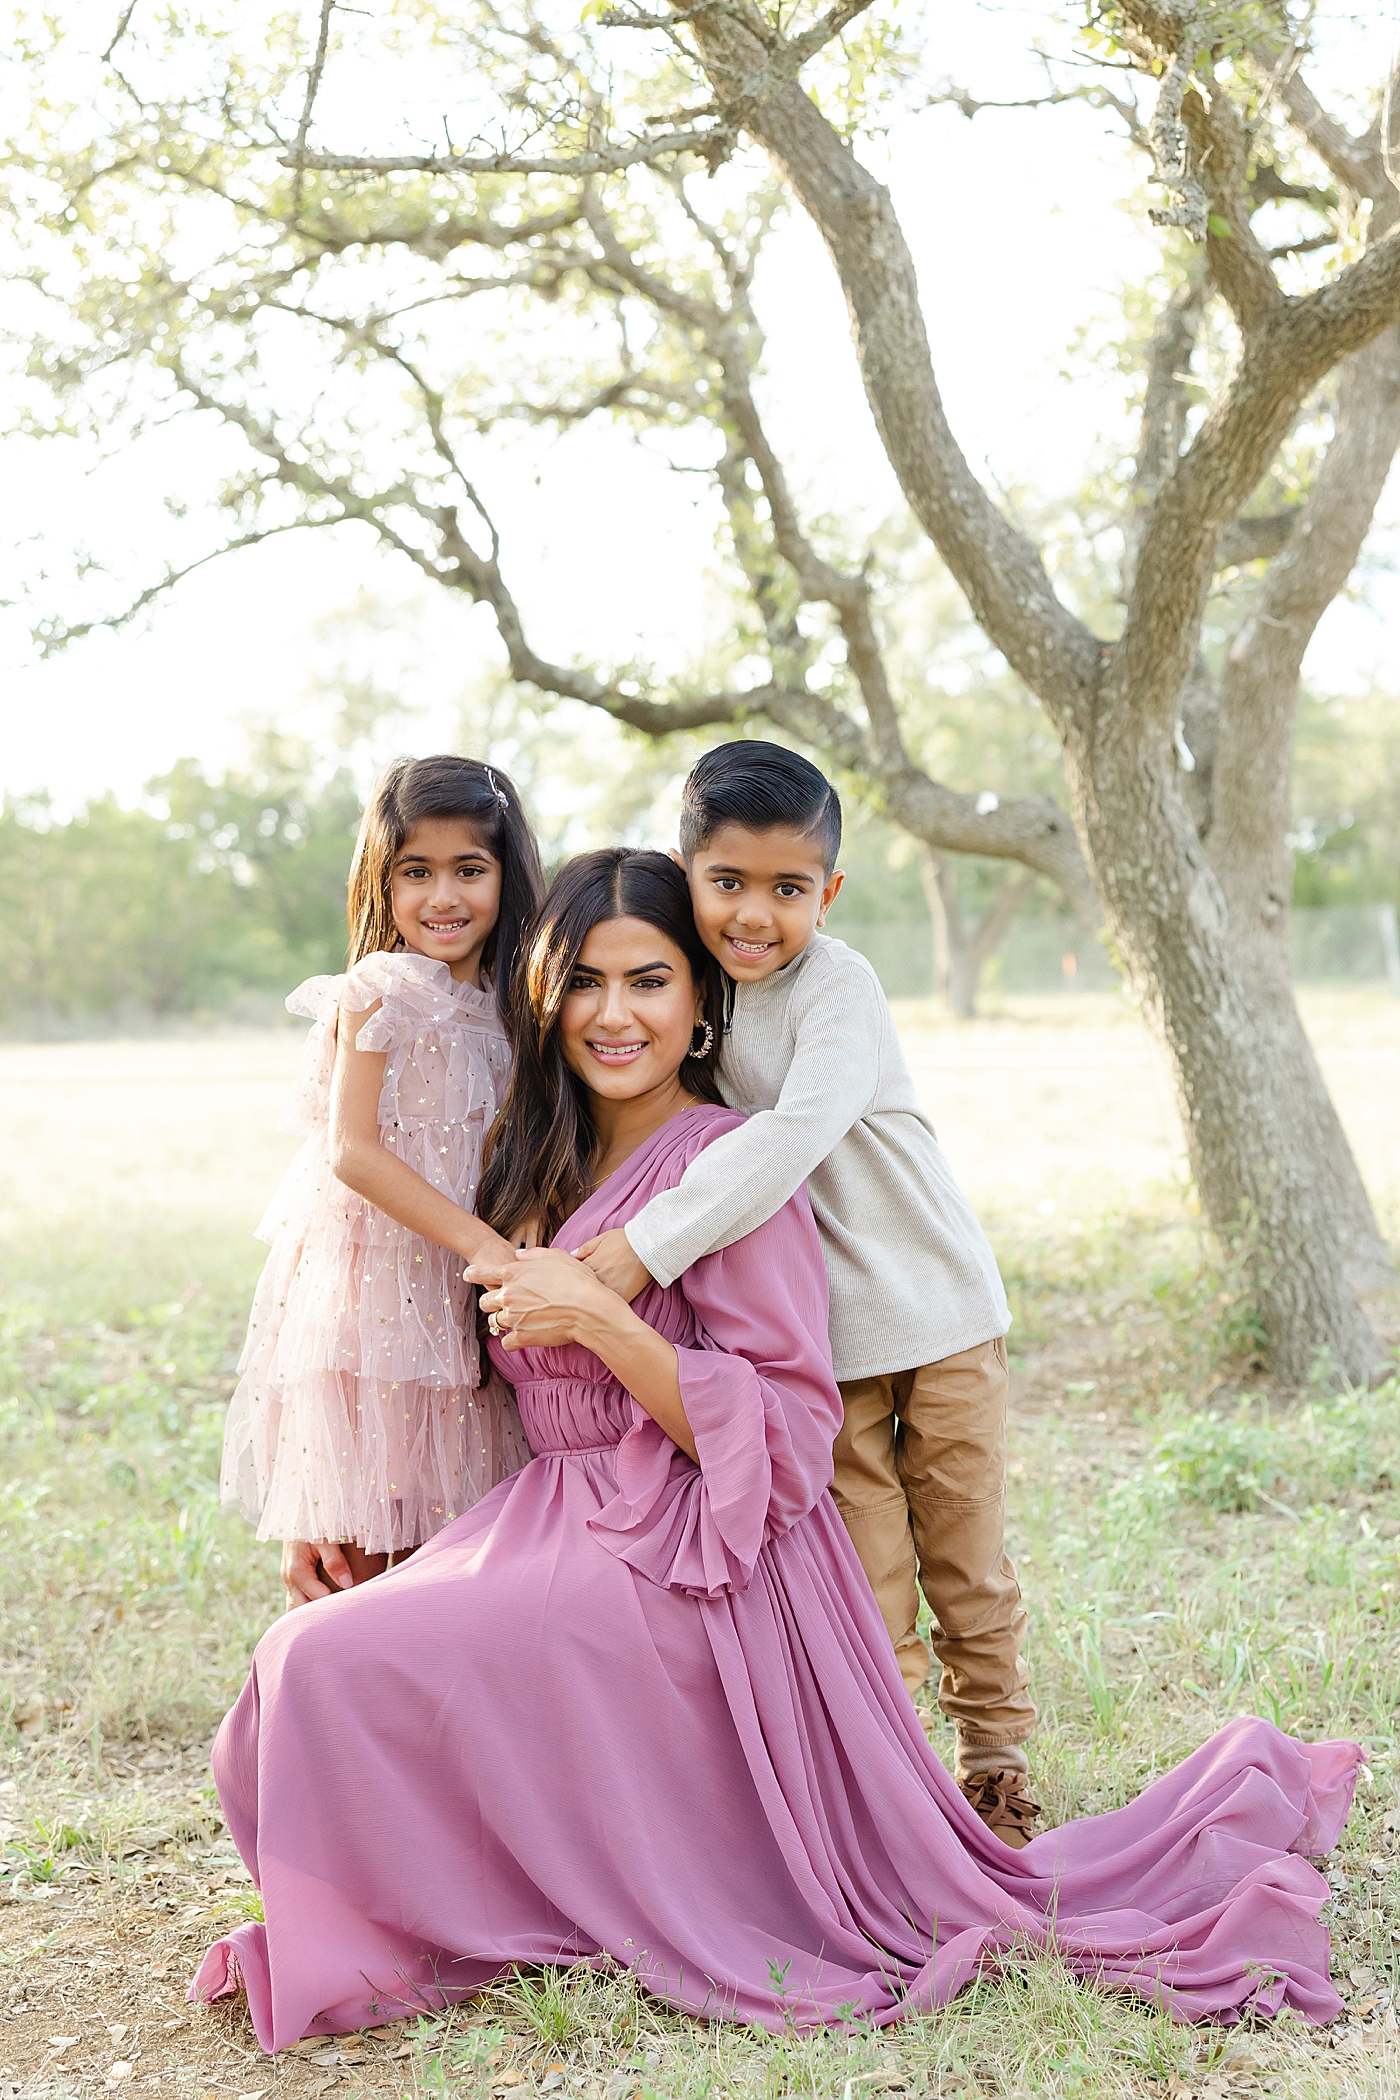 Mom with her two little ones during their Field Family Session | Image by Sana Ahmed Photography